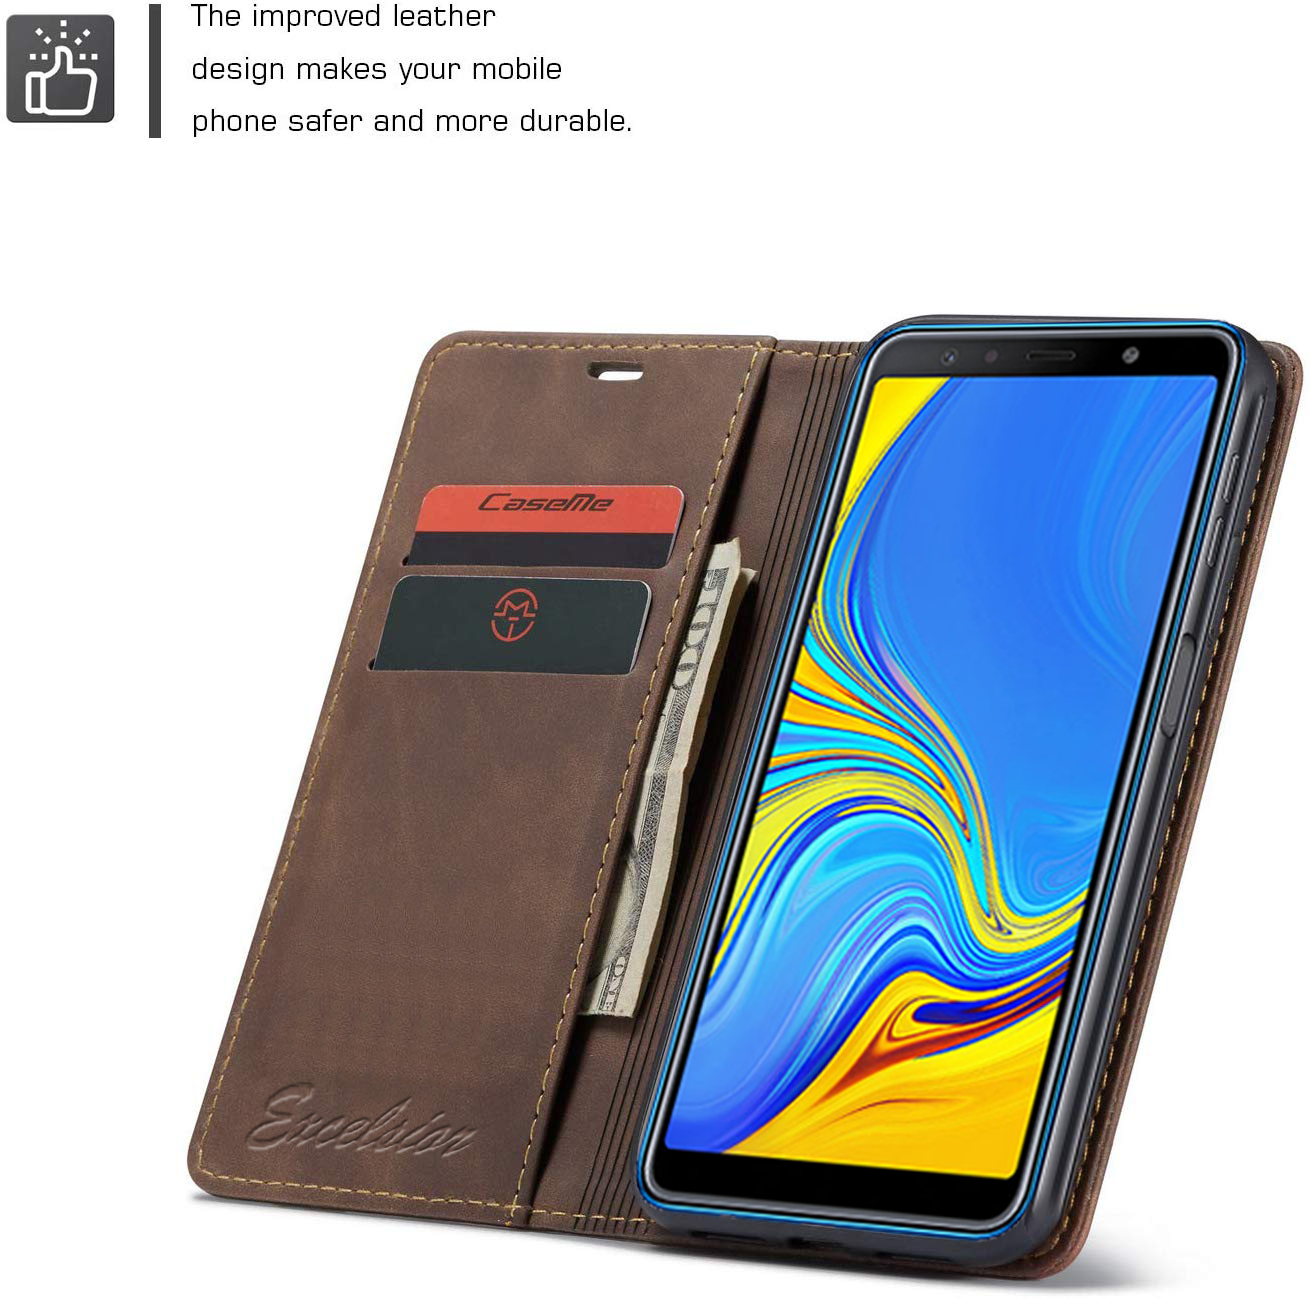 Samsung Galaxy A7 2018 Leather Wallet flip case cover with card slots by Excelsior